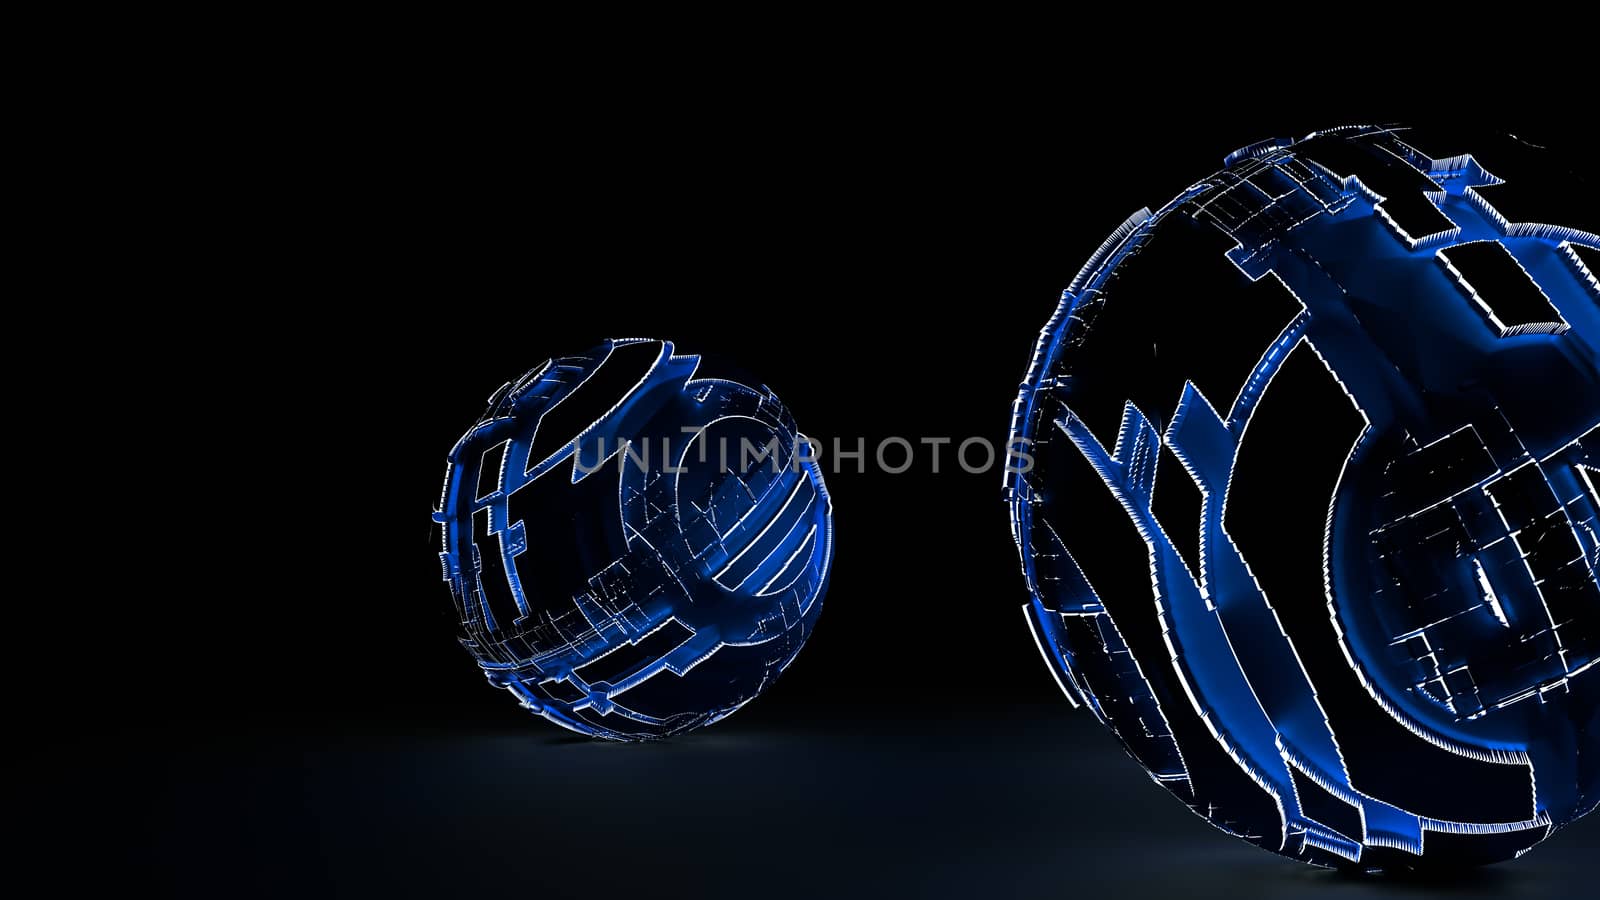 Abstract Futuristic Spheres Glowing Blue Light Lay On The Black Surface. Futuristic Background. 3D Illustrations